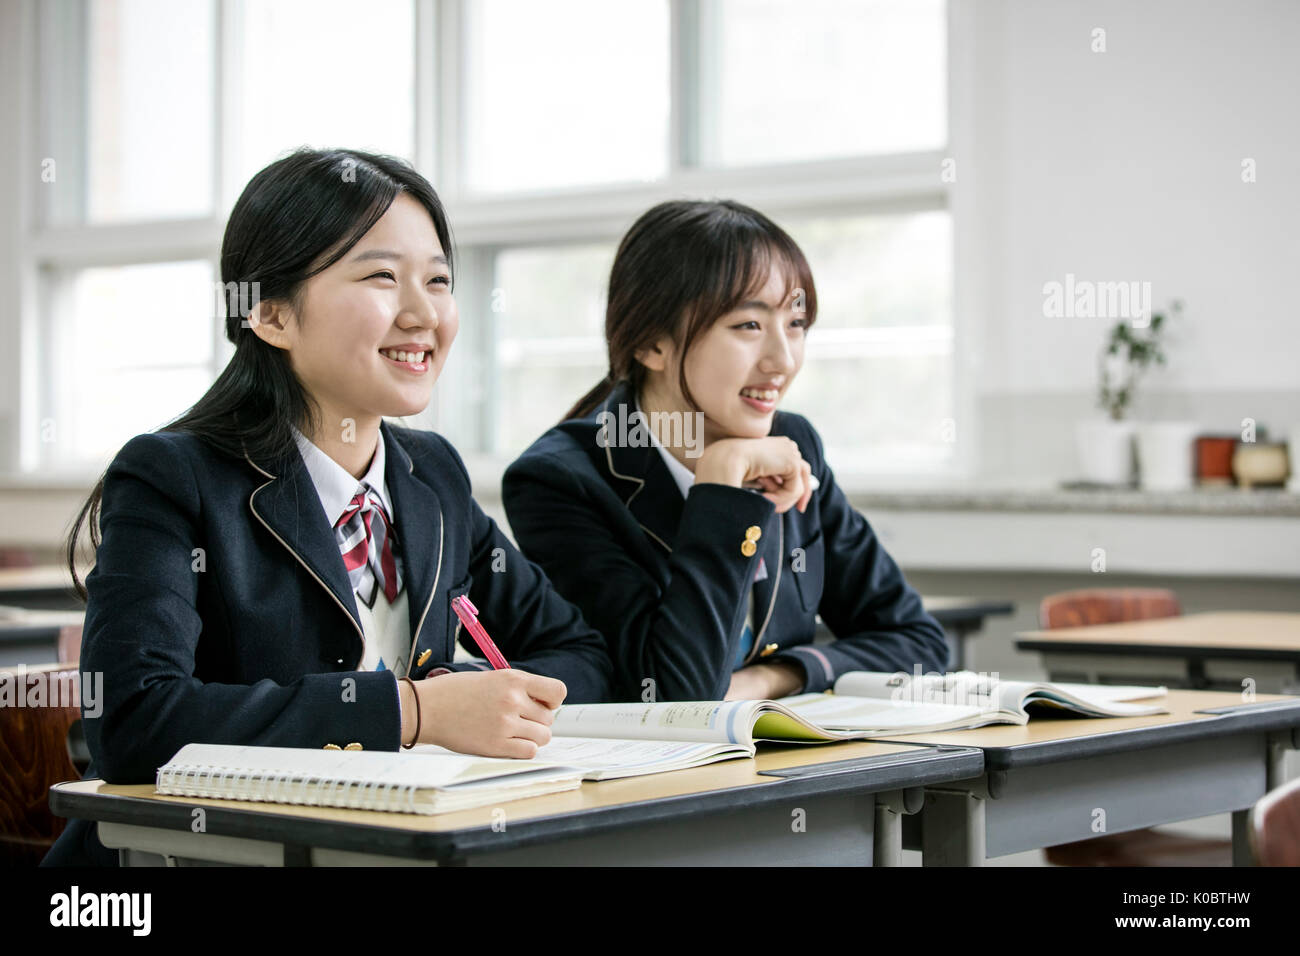 Portrait of two smiling school in classroom Banque D'Images